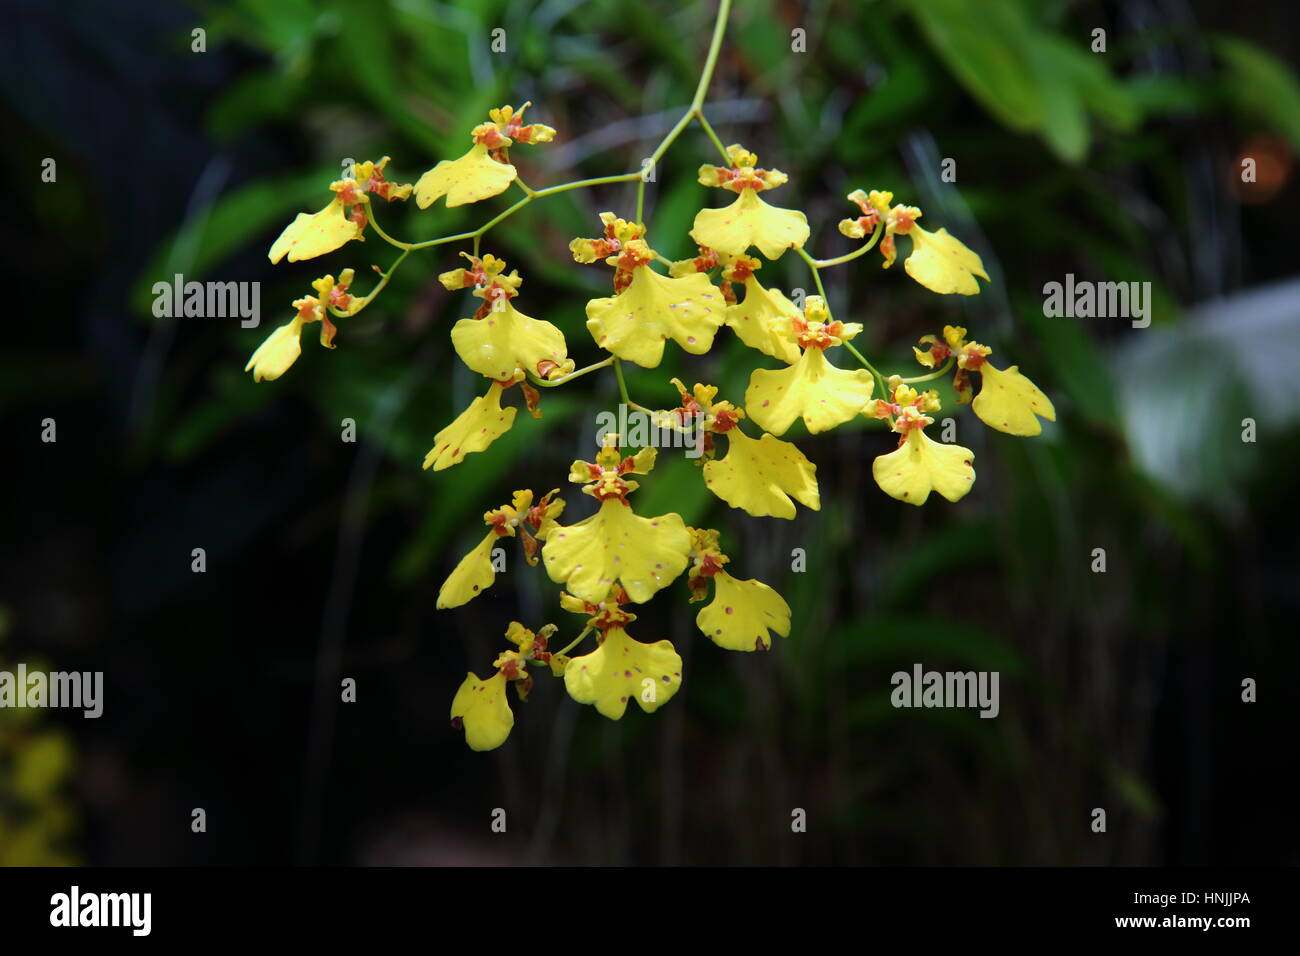 An orchid in bloom, Oncidium species. Stock Photo